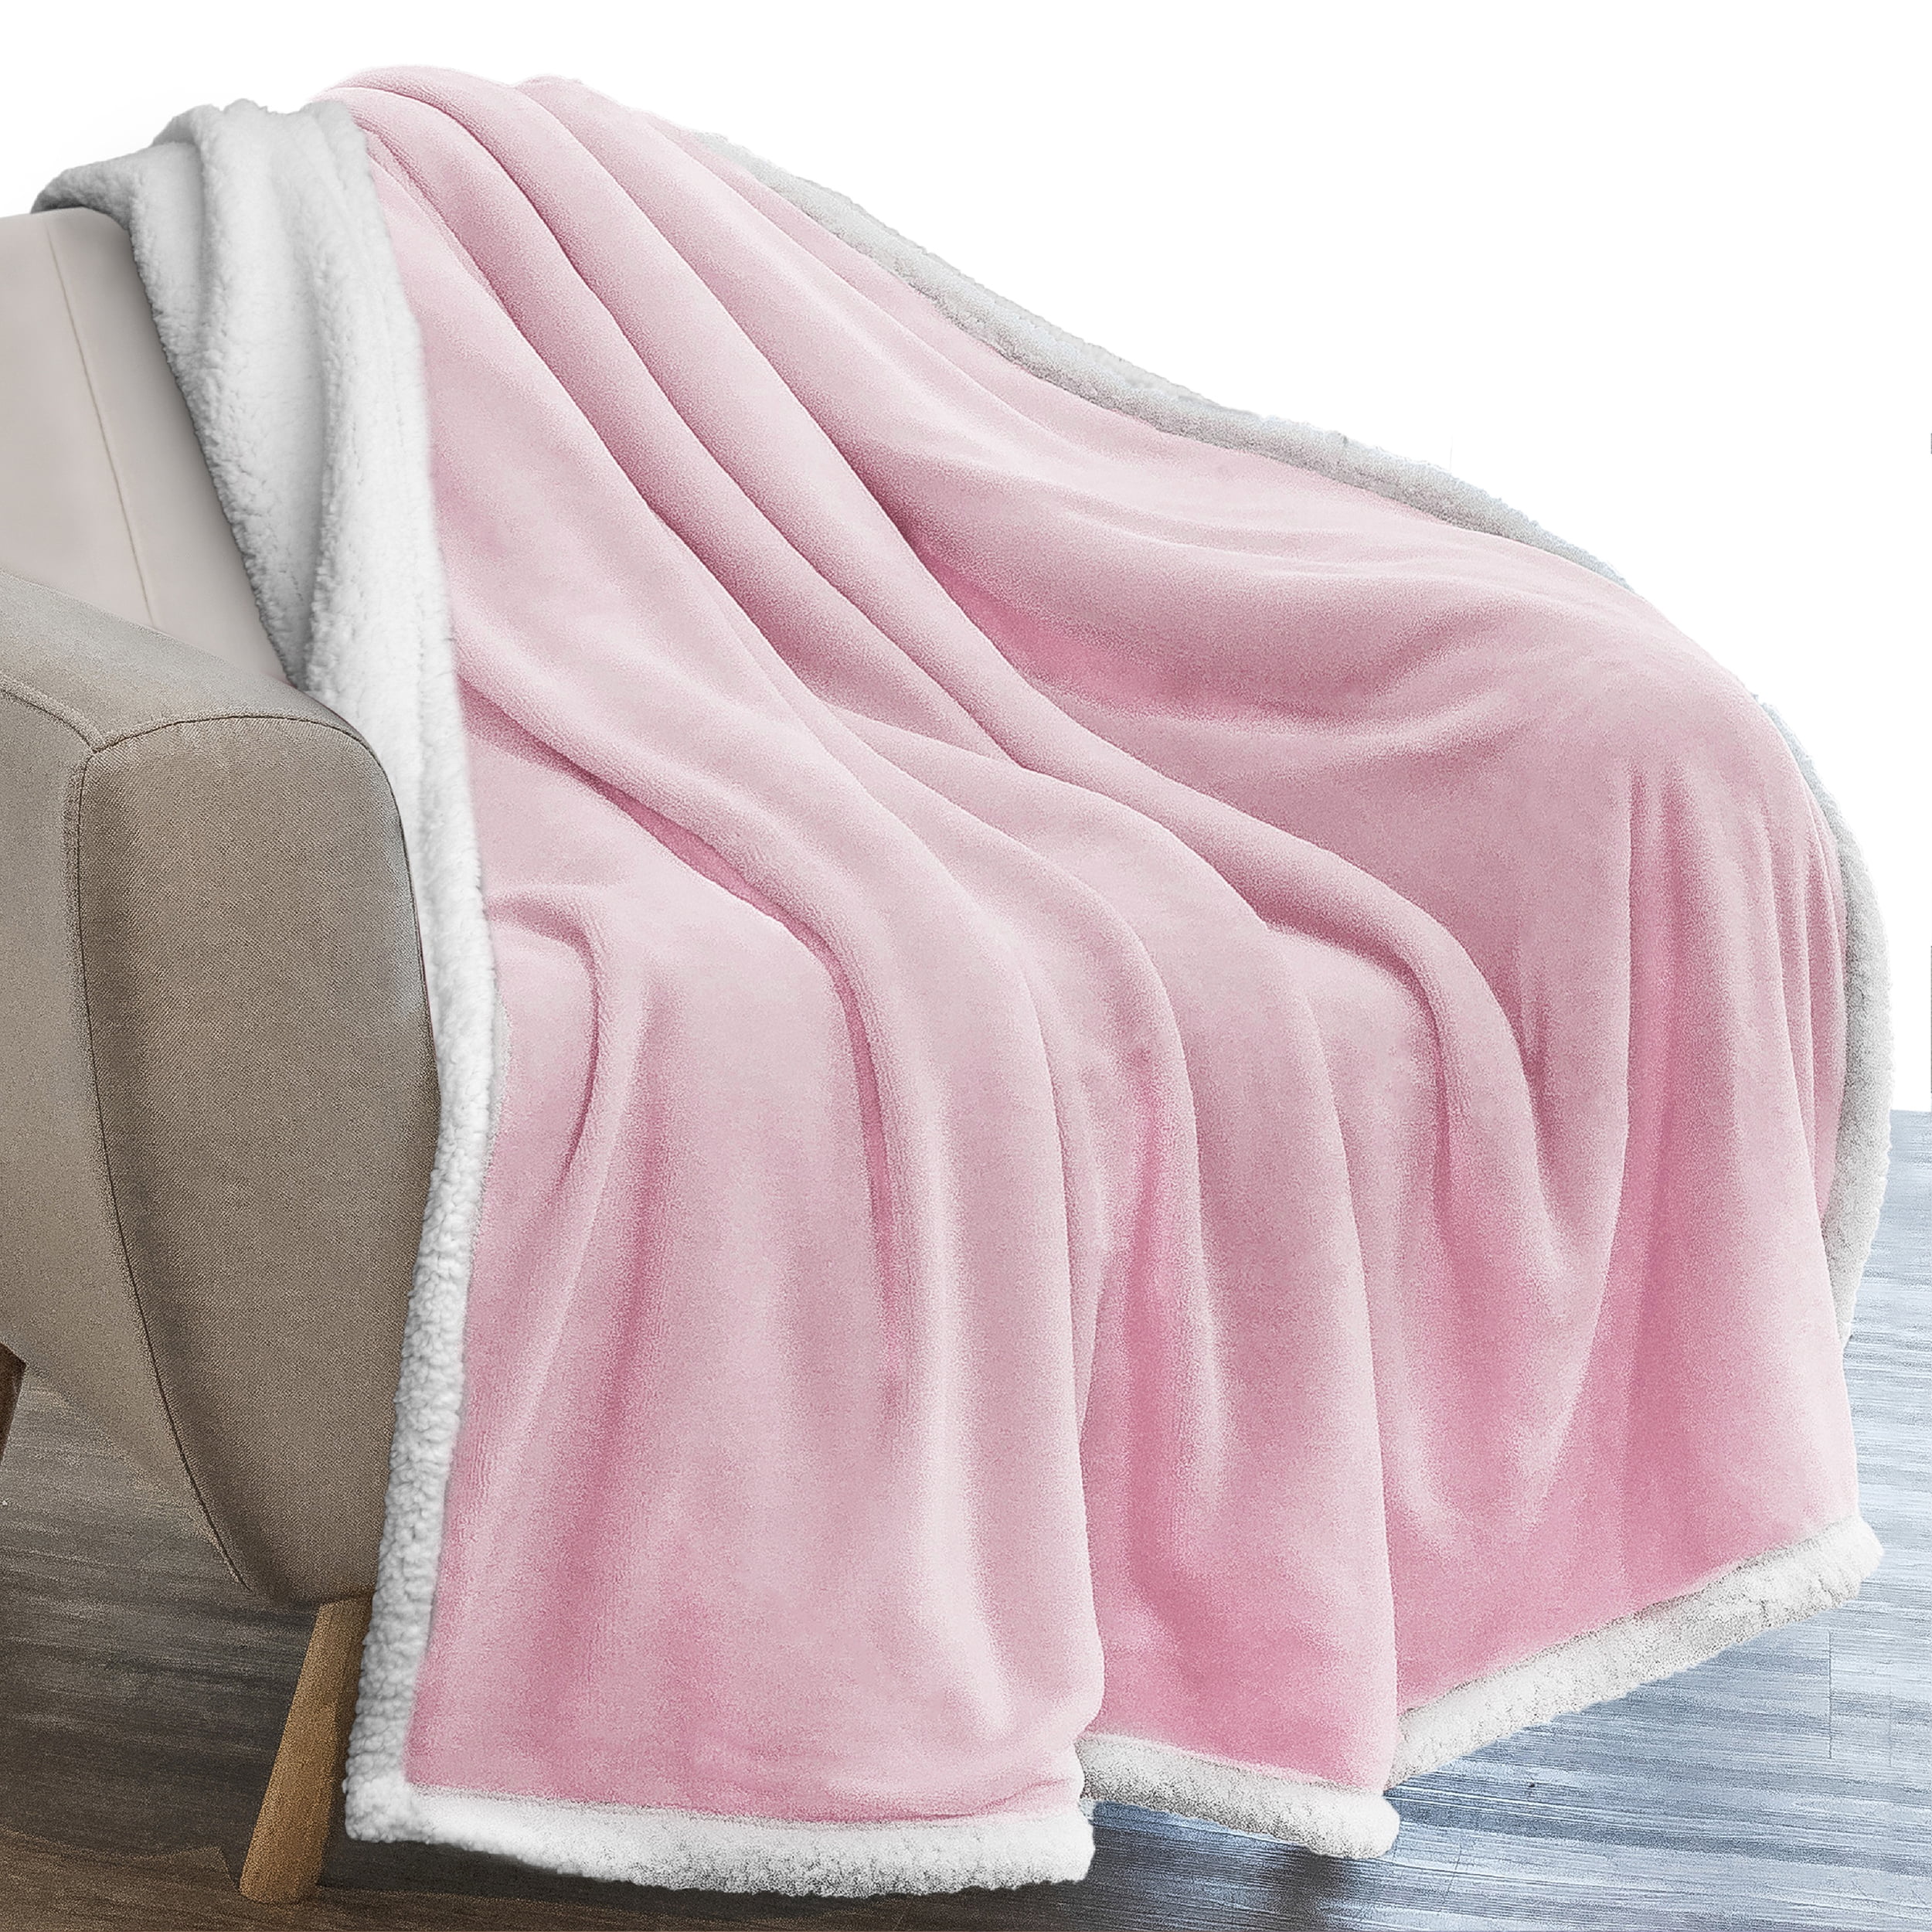 This 30 Little Known Truths On Fuzzy Pink Blanket White And Grey Strips With Fuzzy Heart On